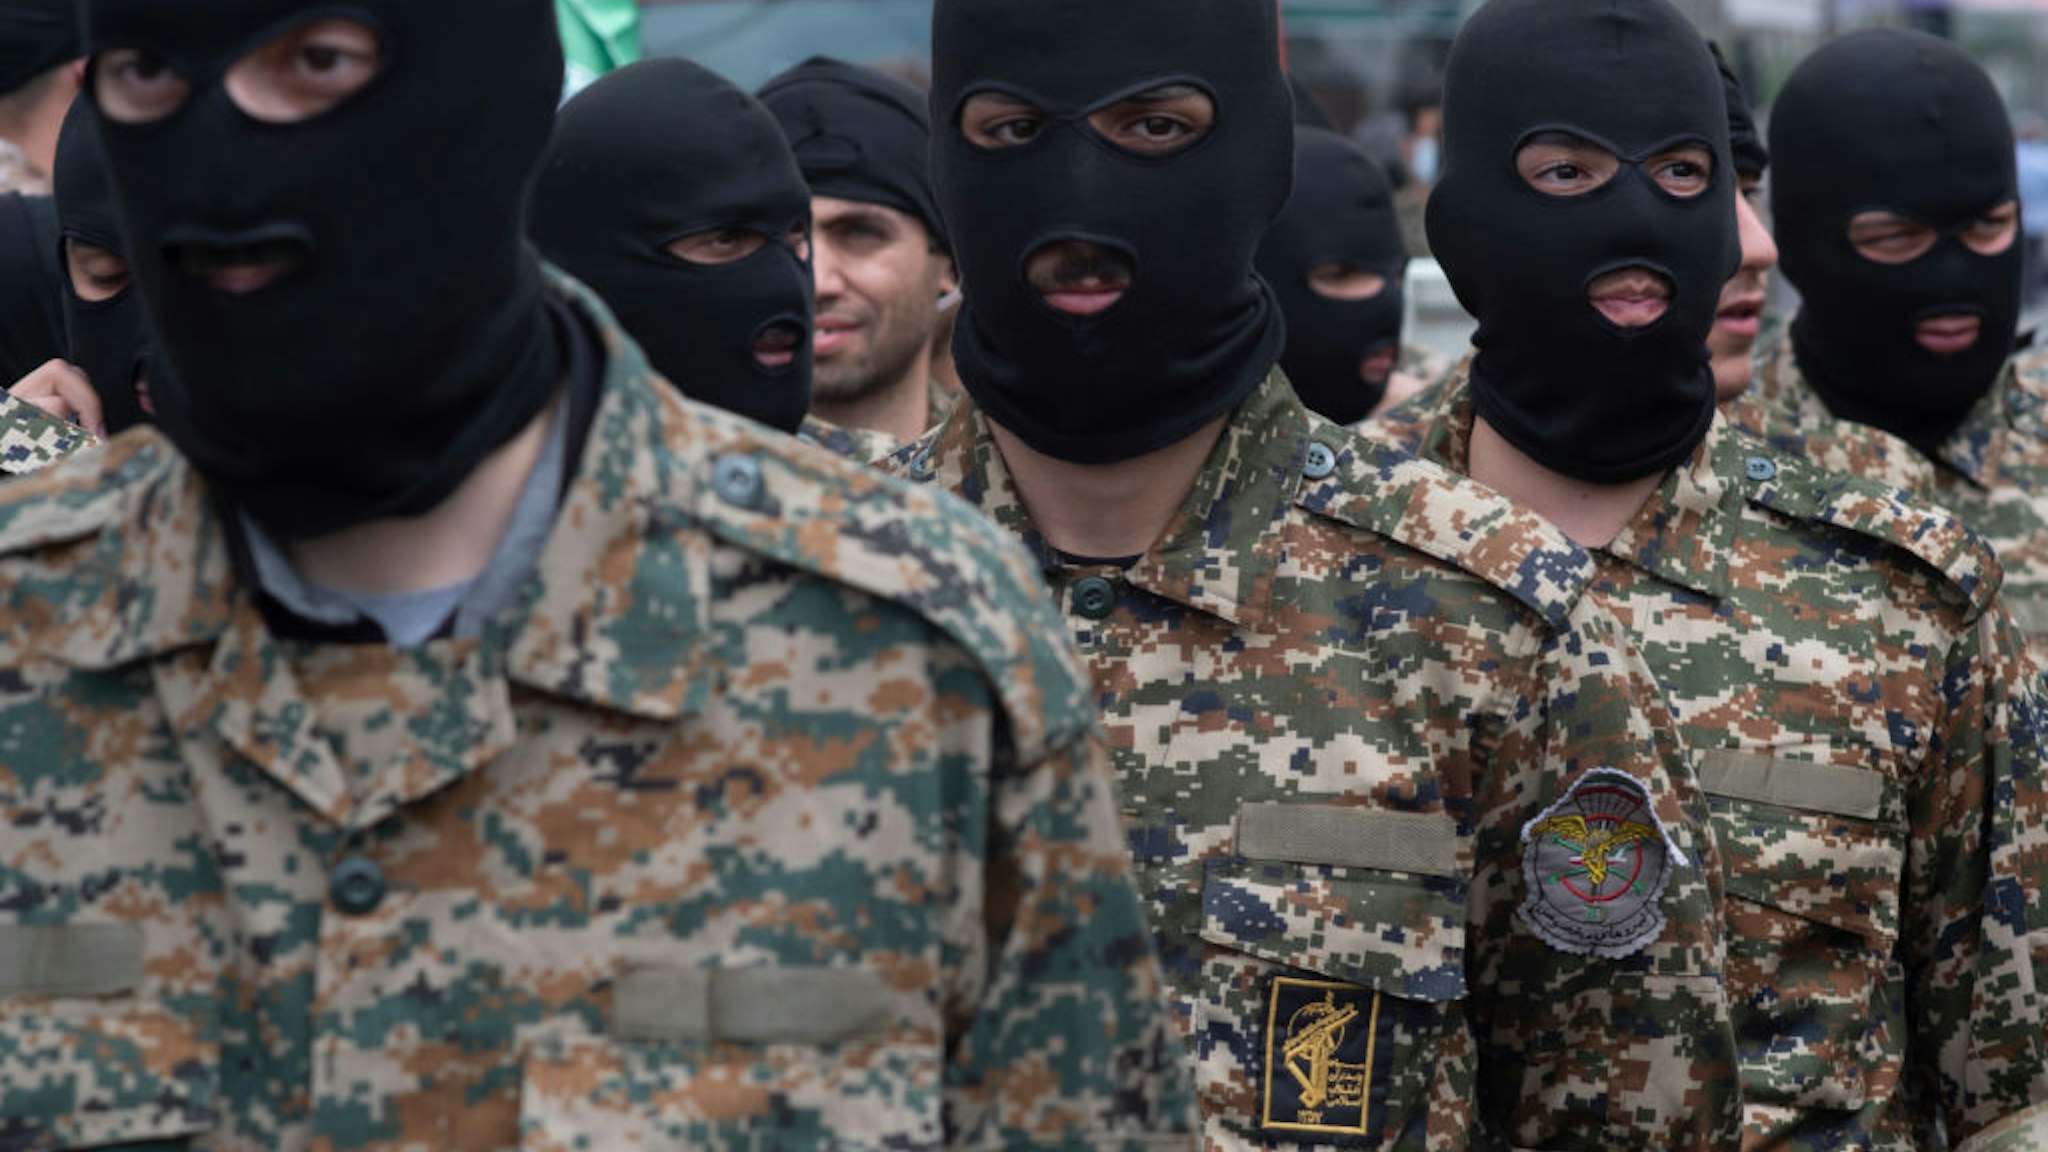 Islamic Revolutionary Guard Corps (IRGC) military personnel stand guard on an avenue in downtown Tehran.